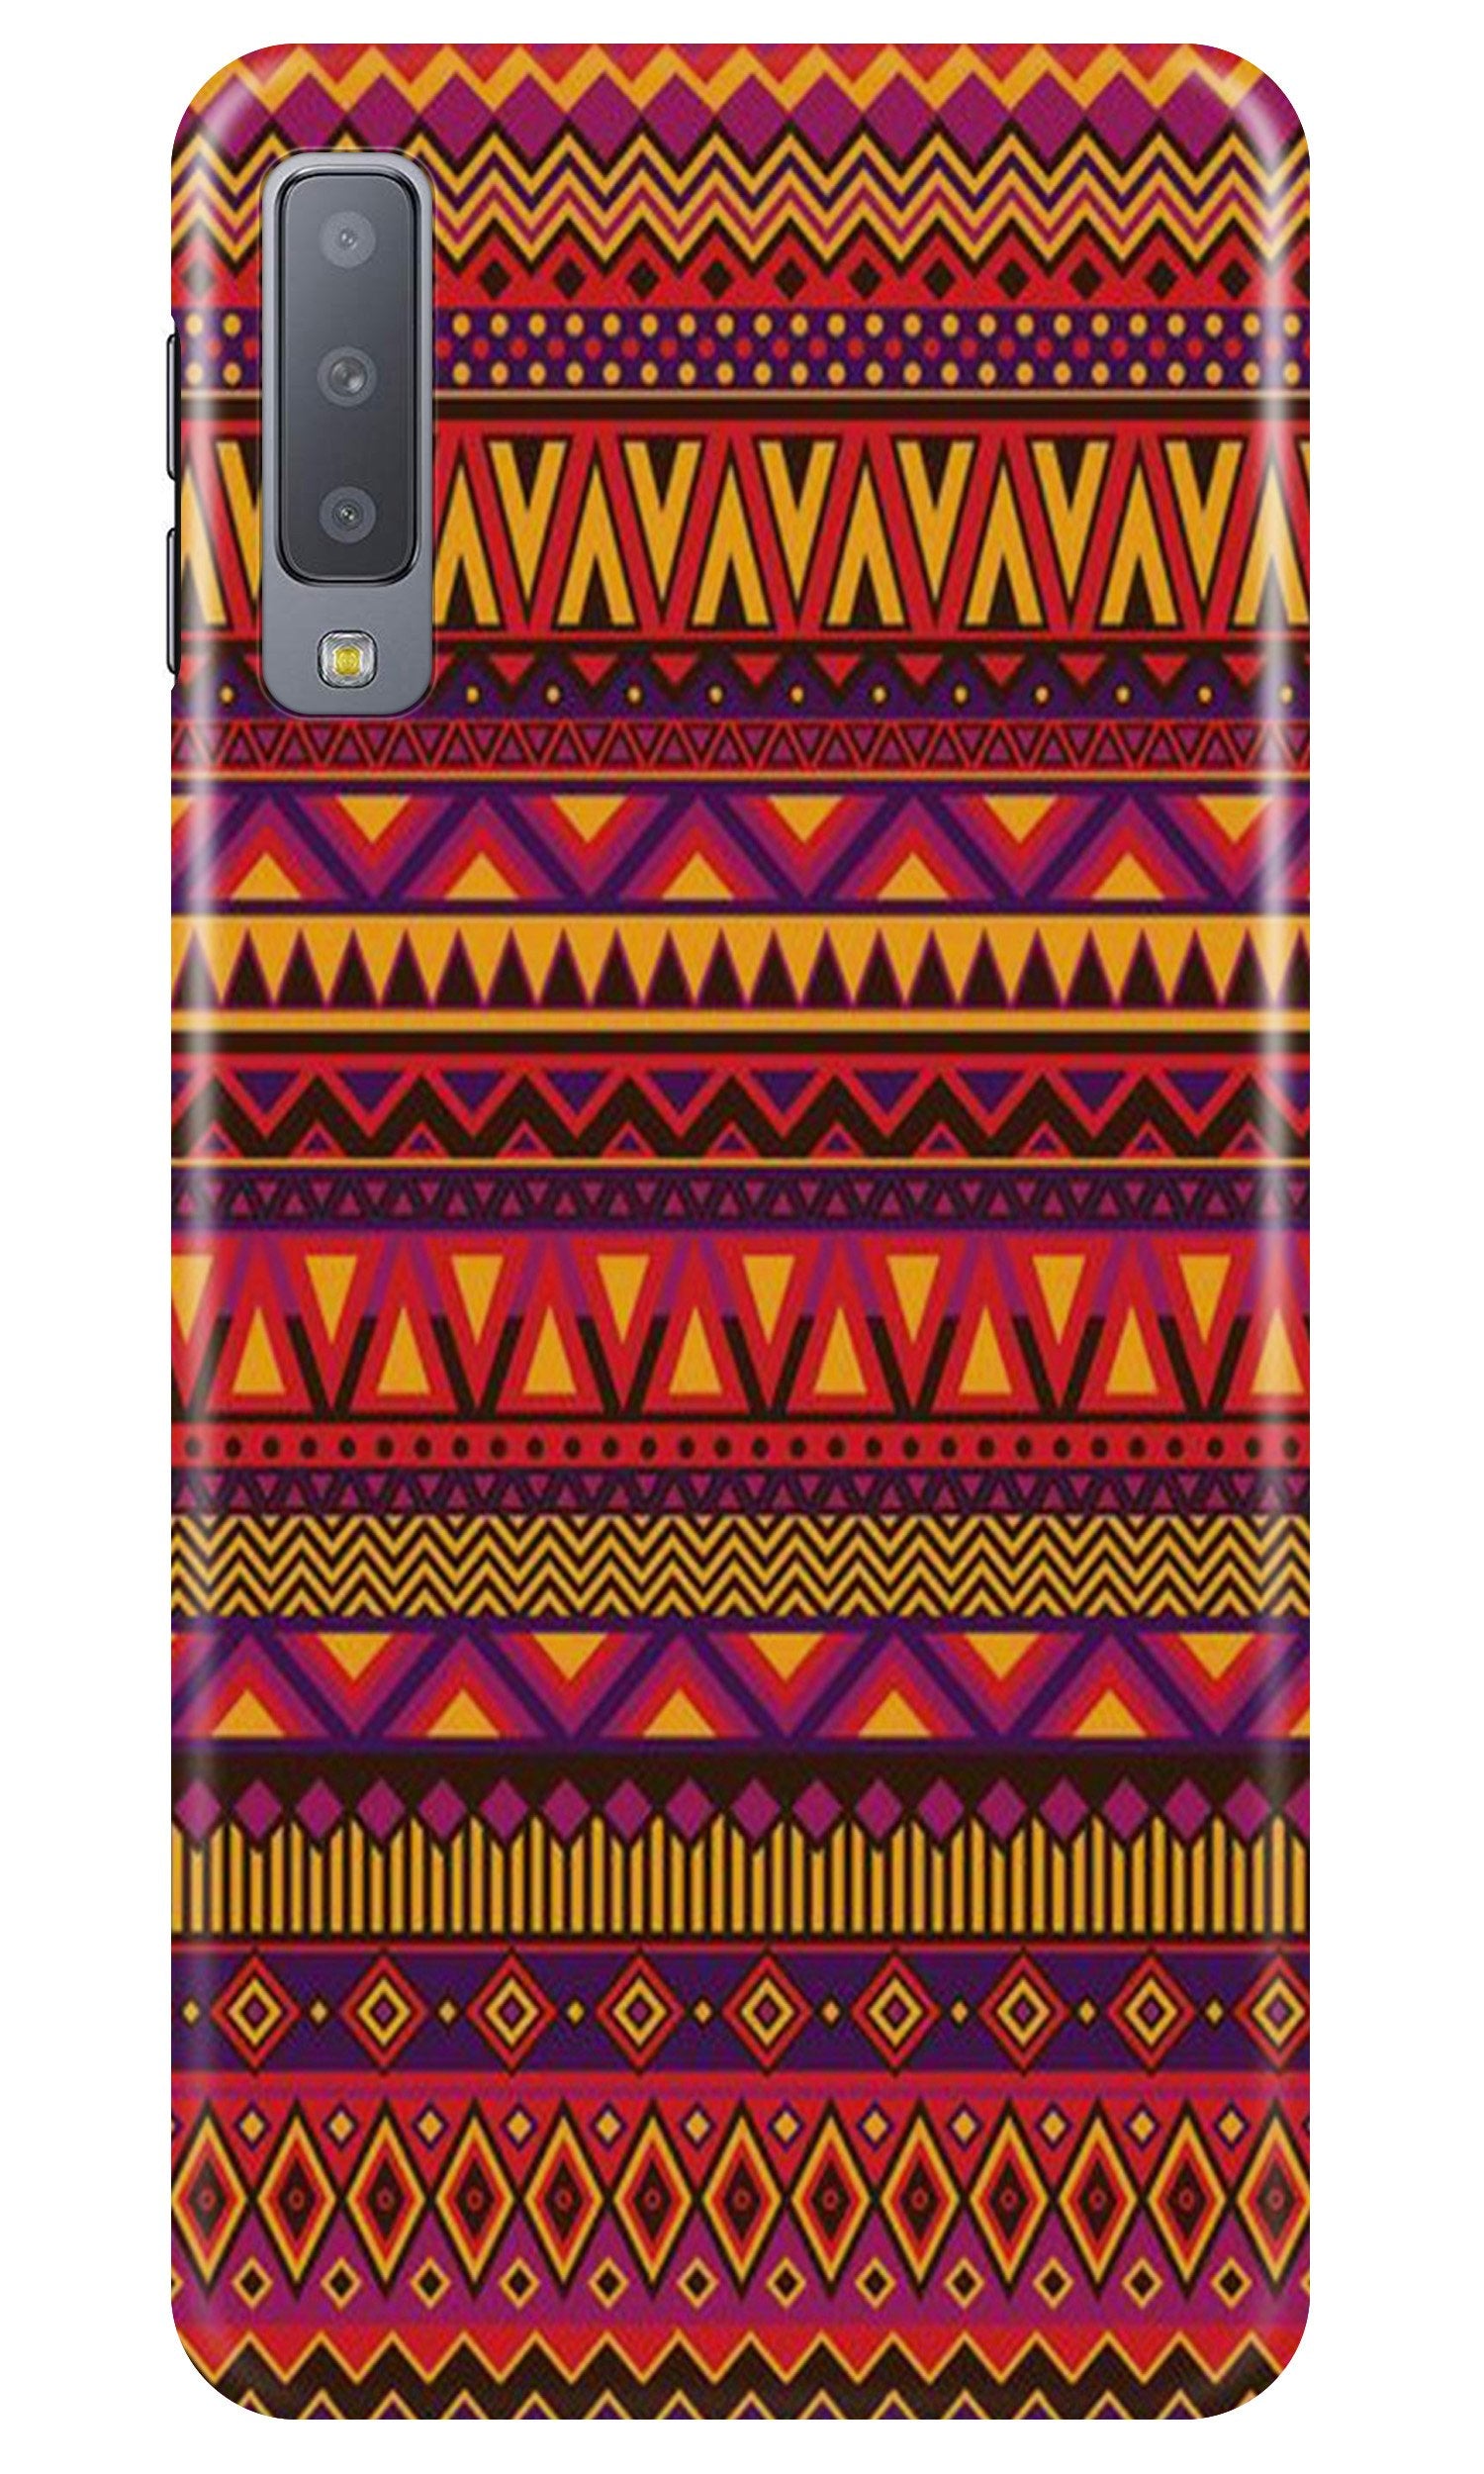 Zigzag line pattern2 Case for Samung Galaxy A70s